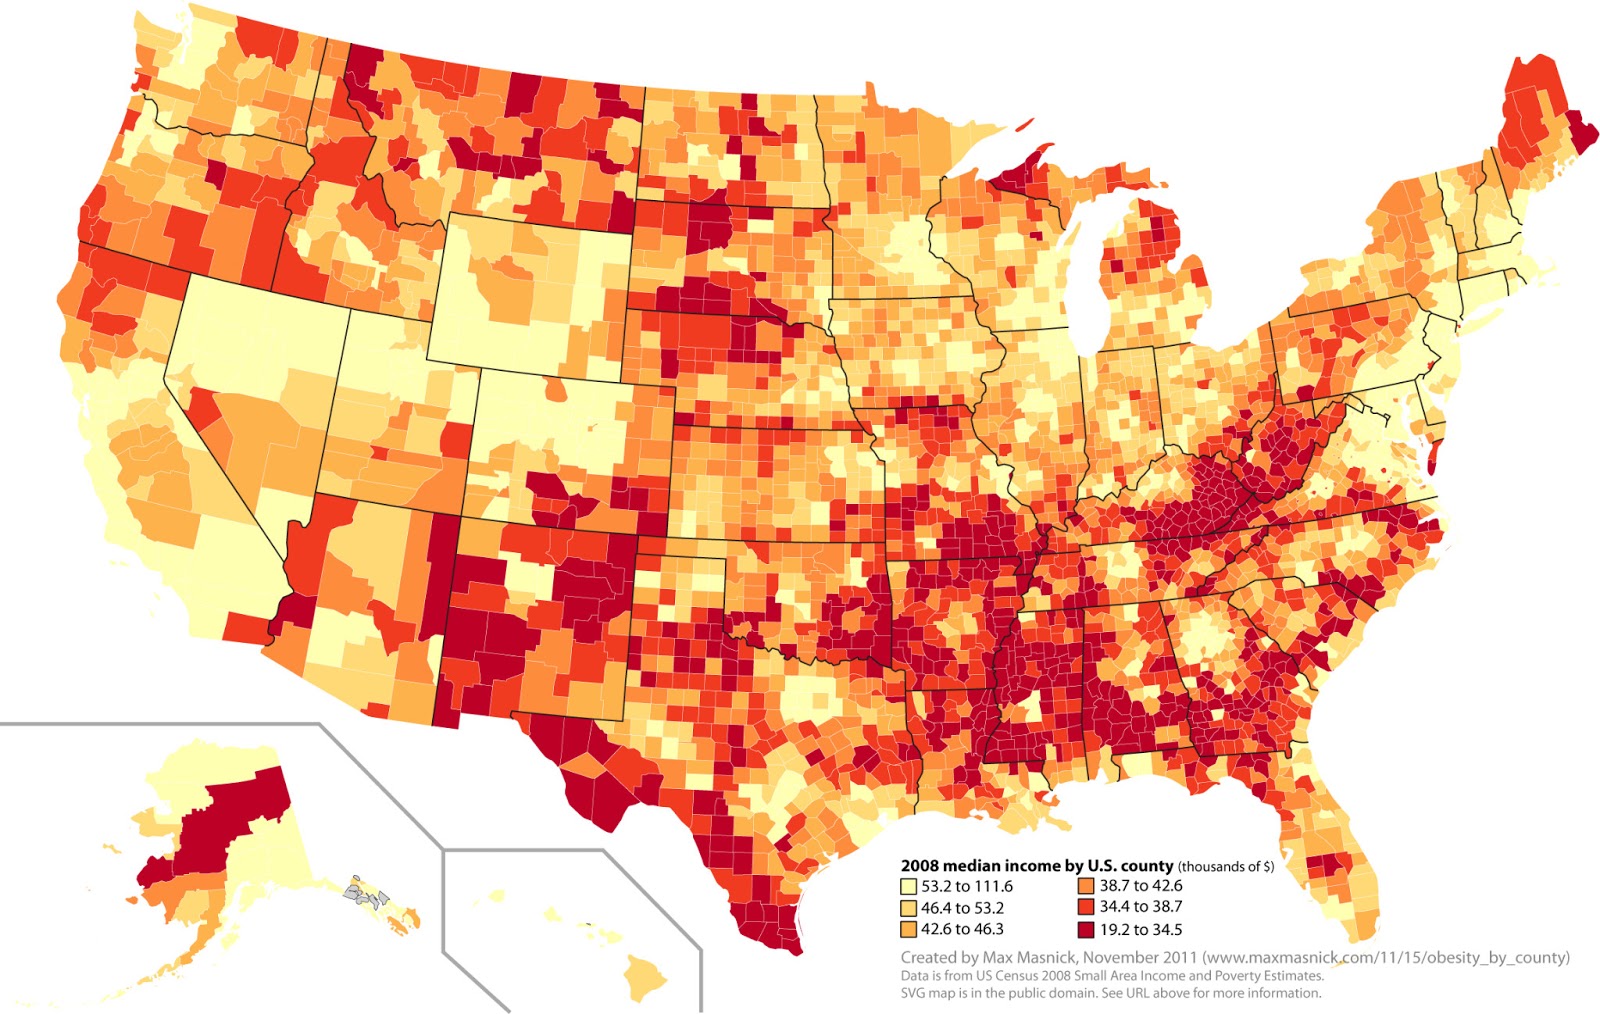 Blogorrhea Poverty And Obesity In America How They Map